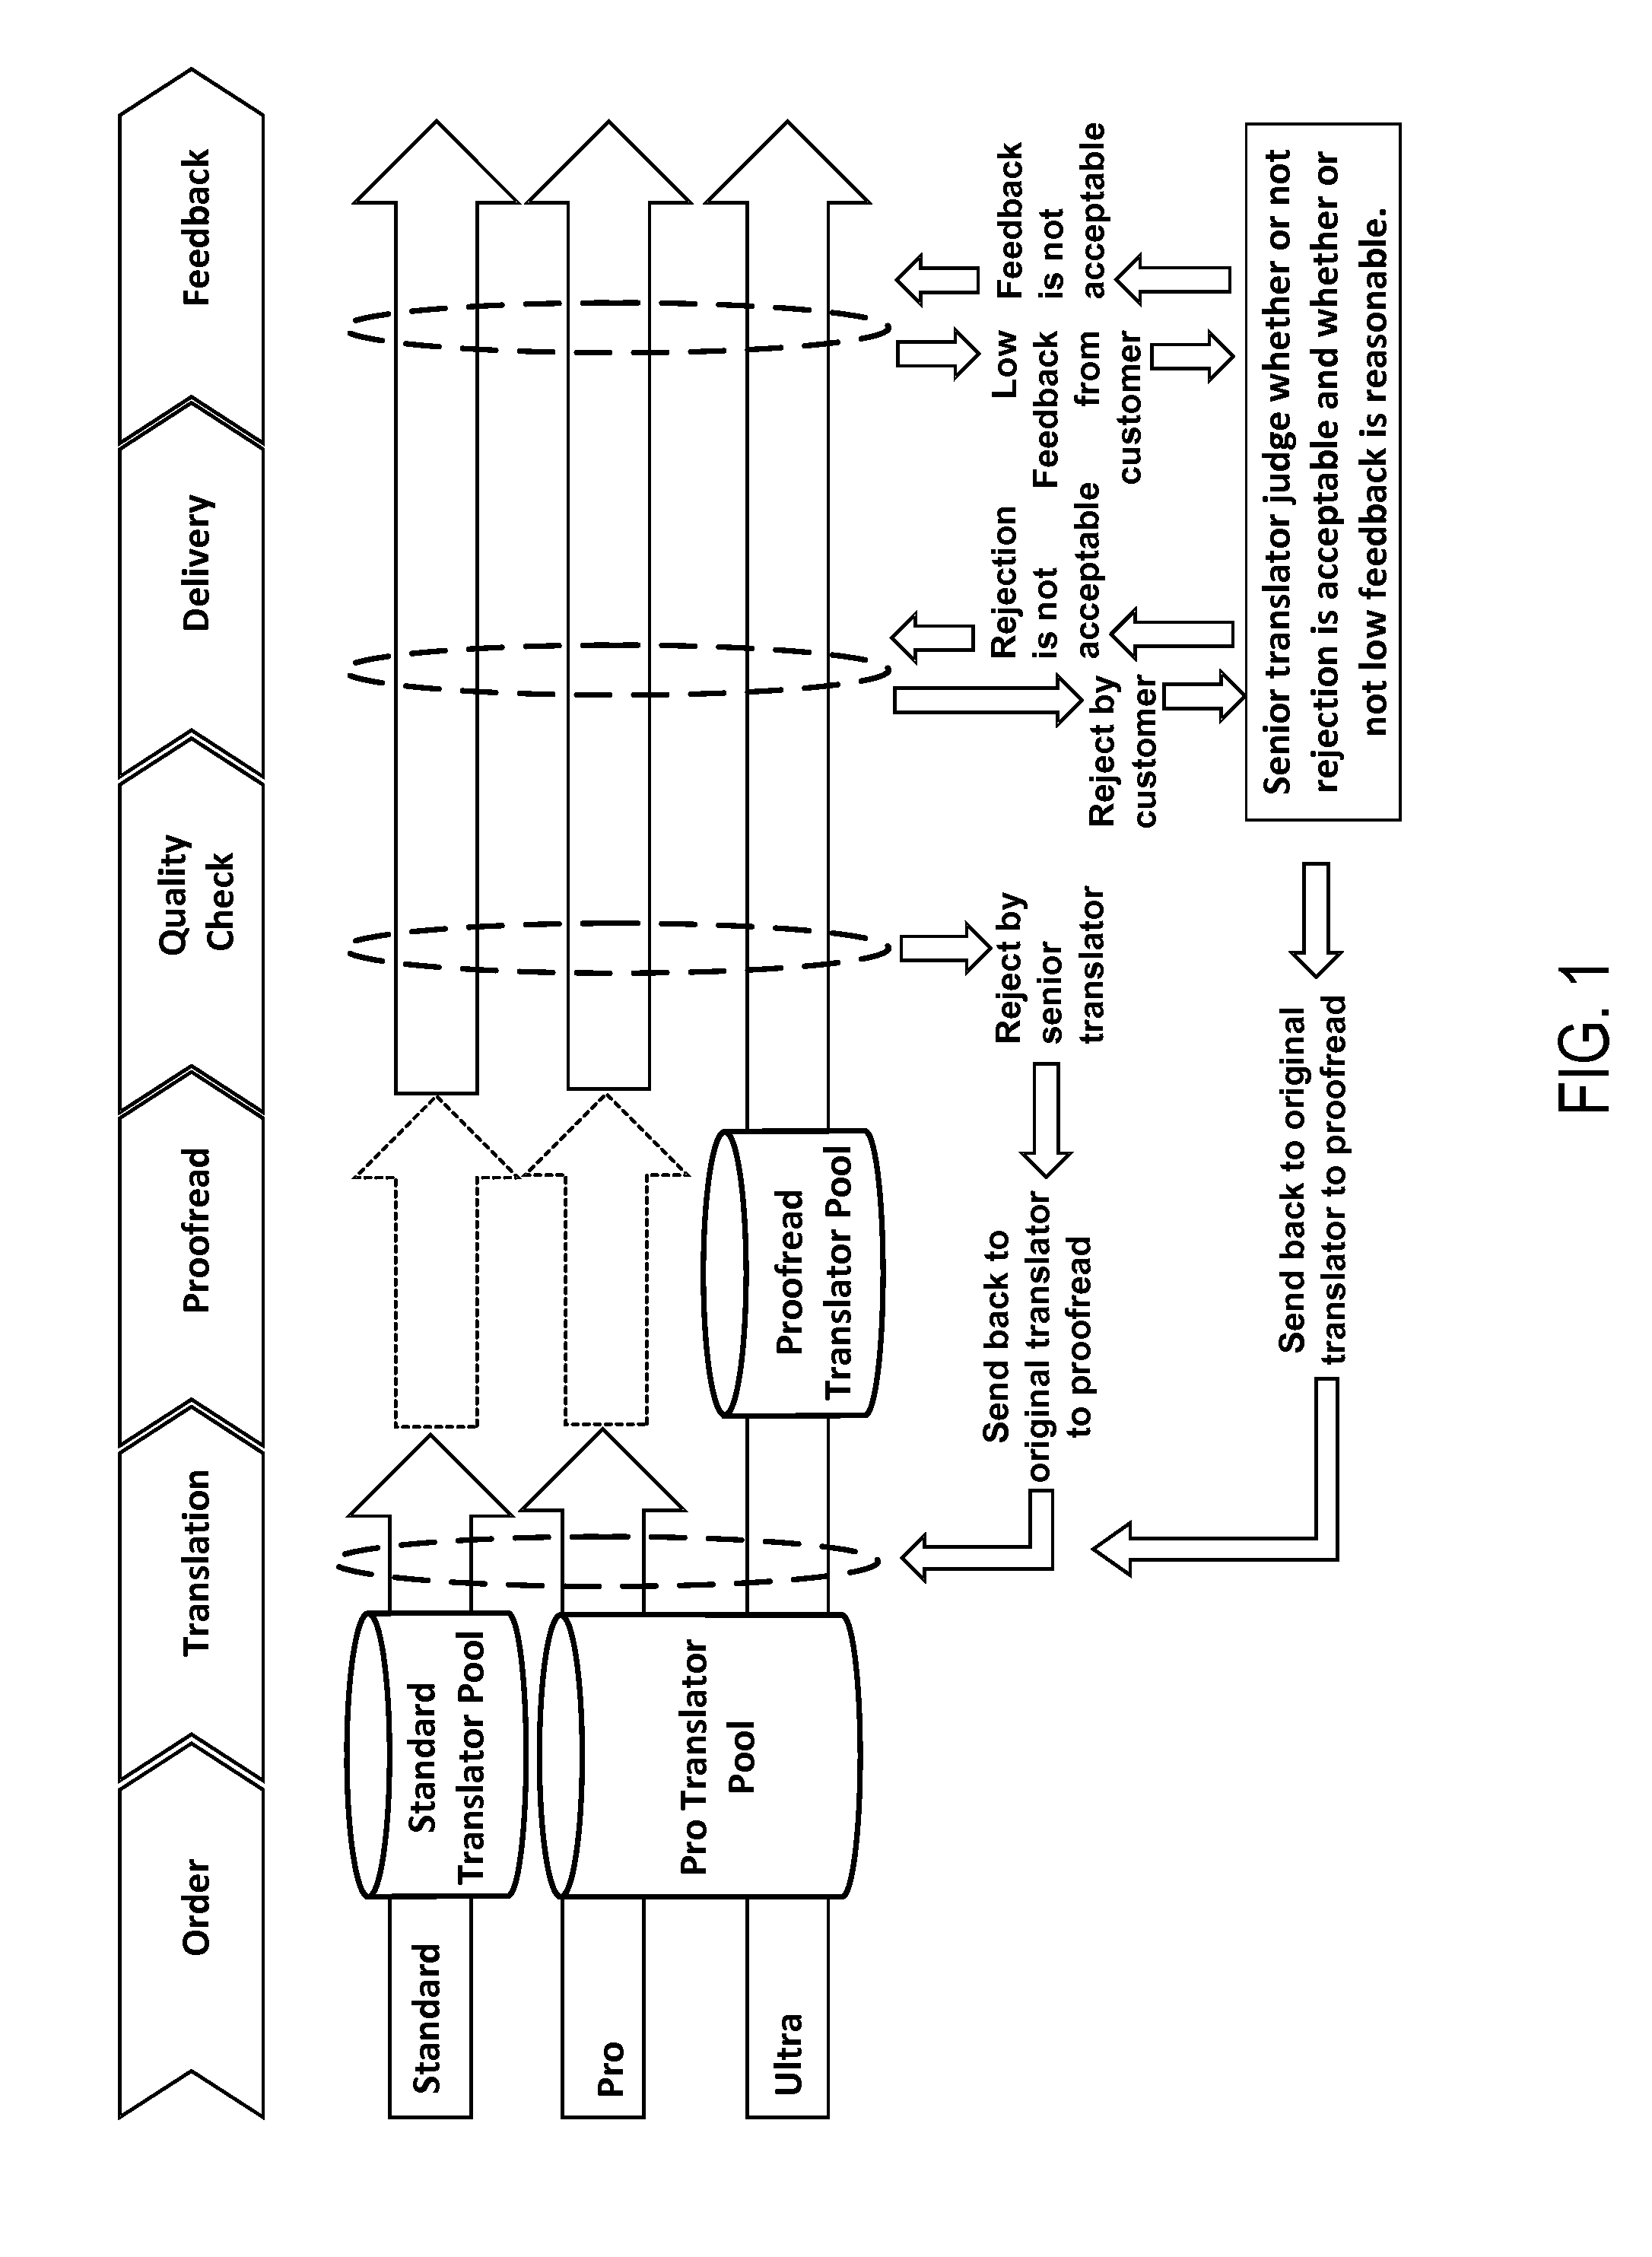 Systems and methods to control work progress for content transformation based on natural language processing and/or machine learning